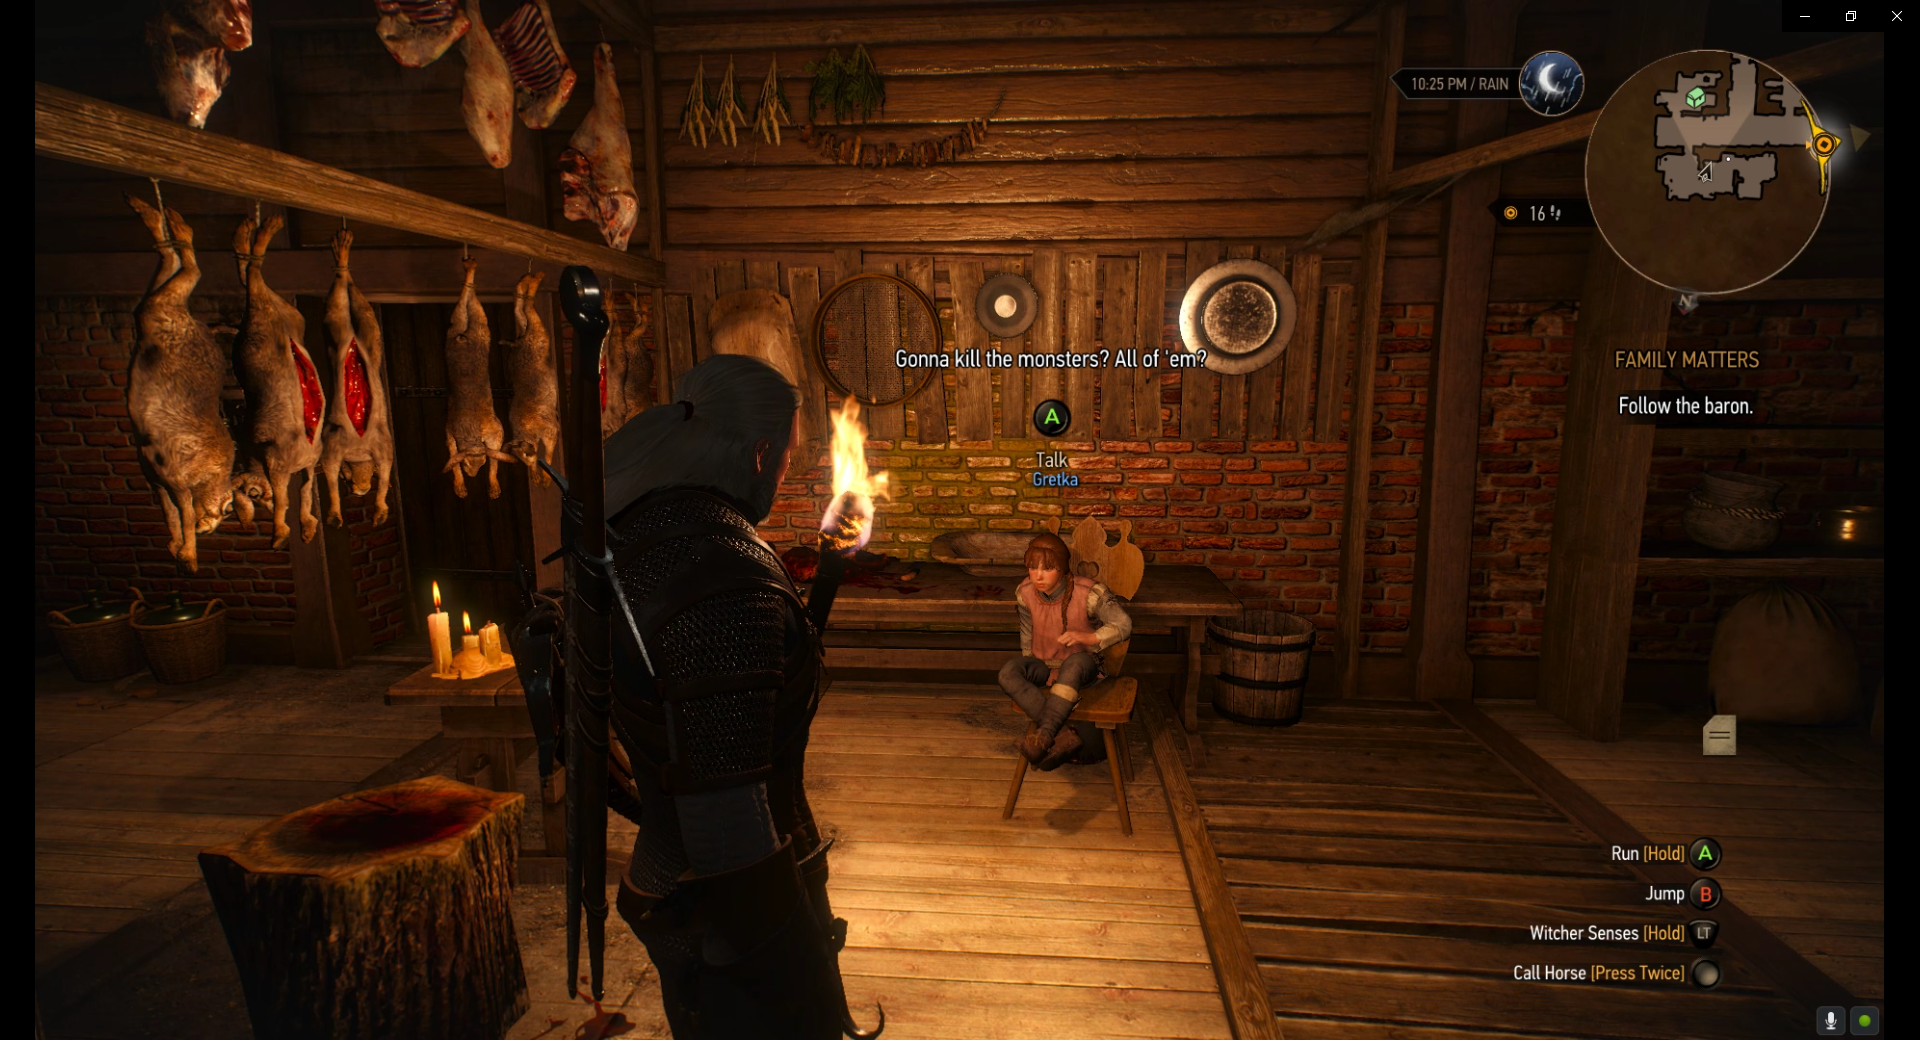 The Witcher 3 Strategy： Ciri's Room (Secondary Quest) – Velen